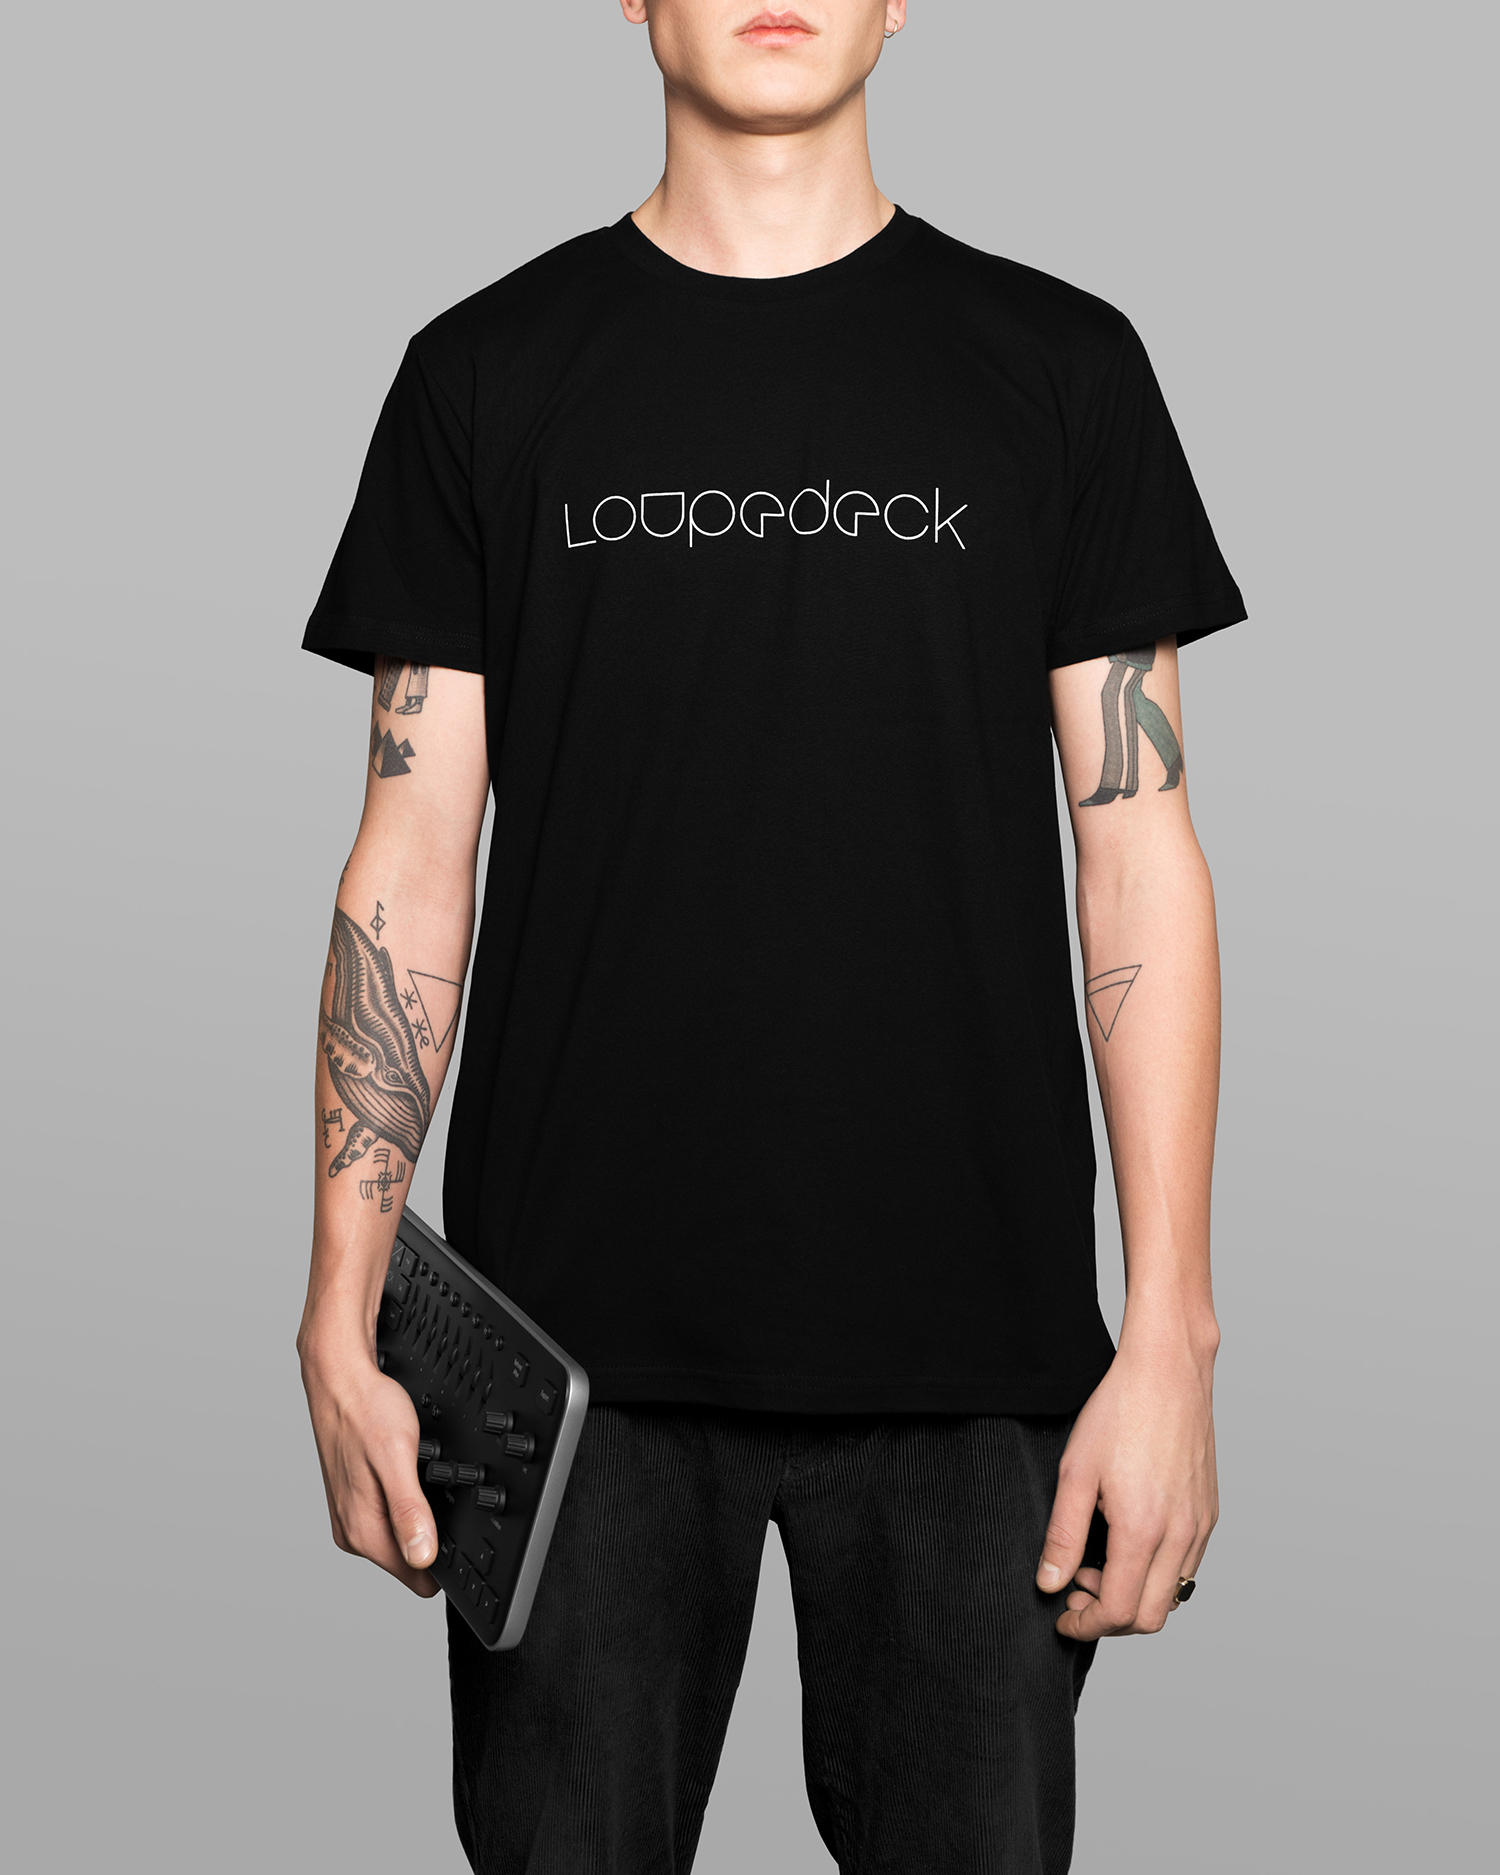 Logo and branded t-shirt by Bond for editing console and start-up Loupedeck